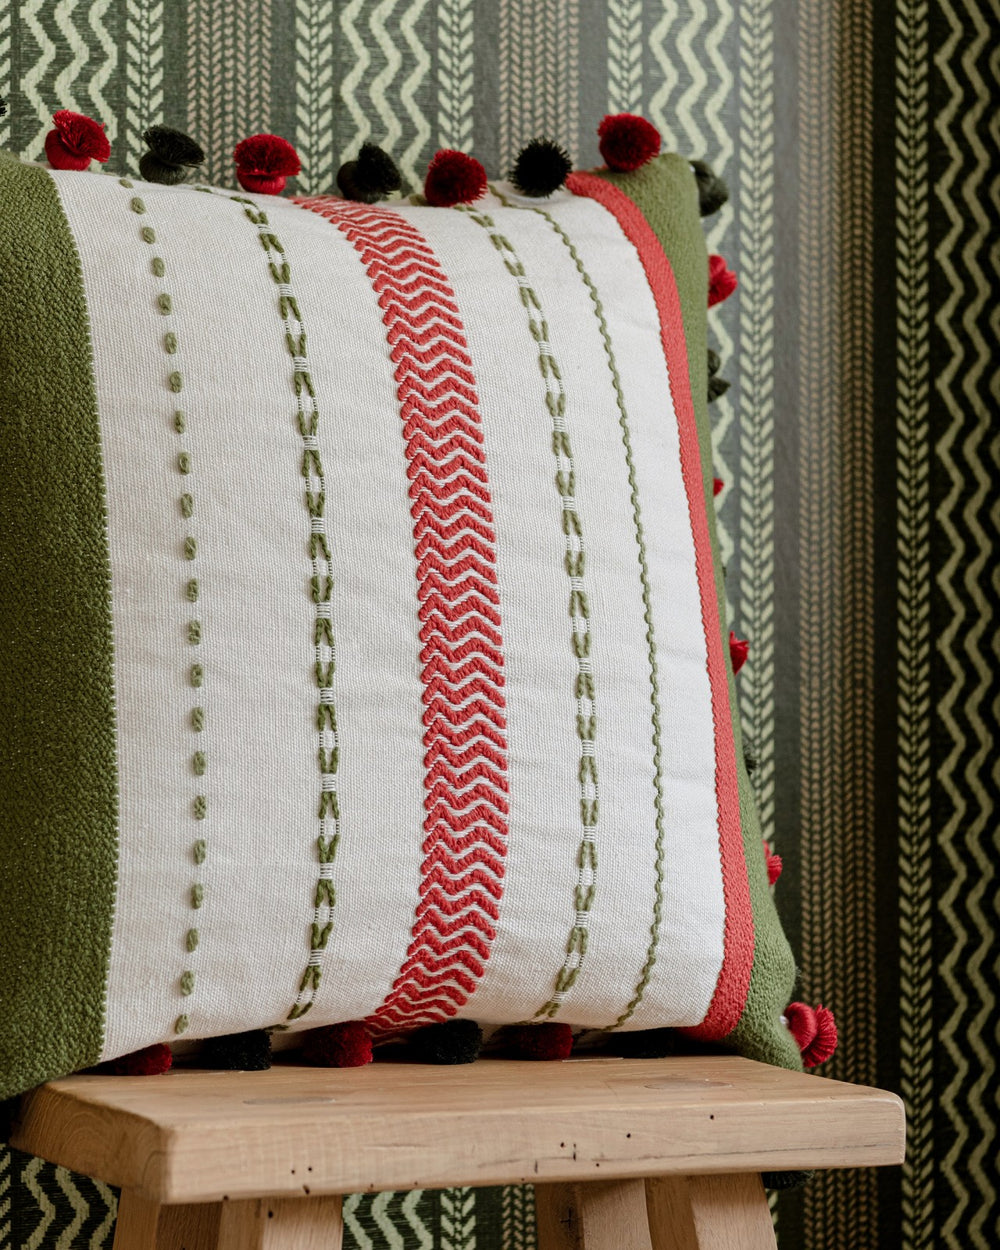 Mind-the-gap-Tyrol-collection-Hanwernlich-woven-fabric-white-red-green-stripe-cotton-linen-mix-alpine-traditional-folklore-pattern-apres-ski-cabin-lodge-textilen